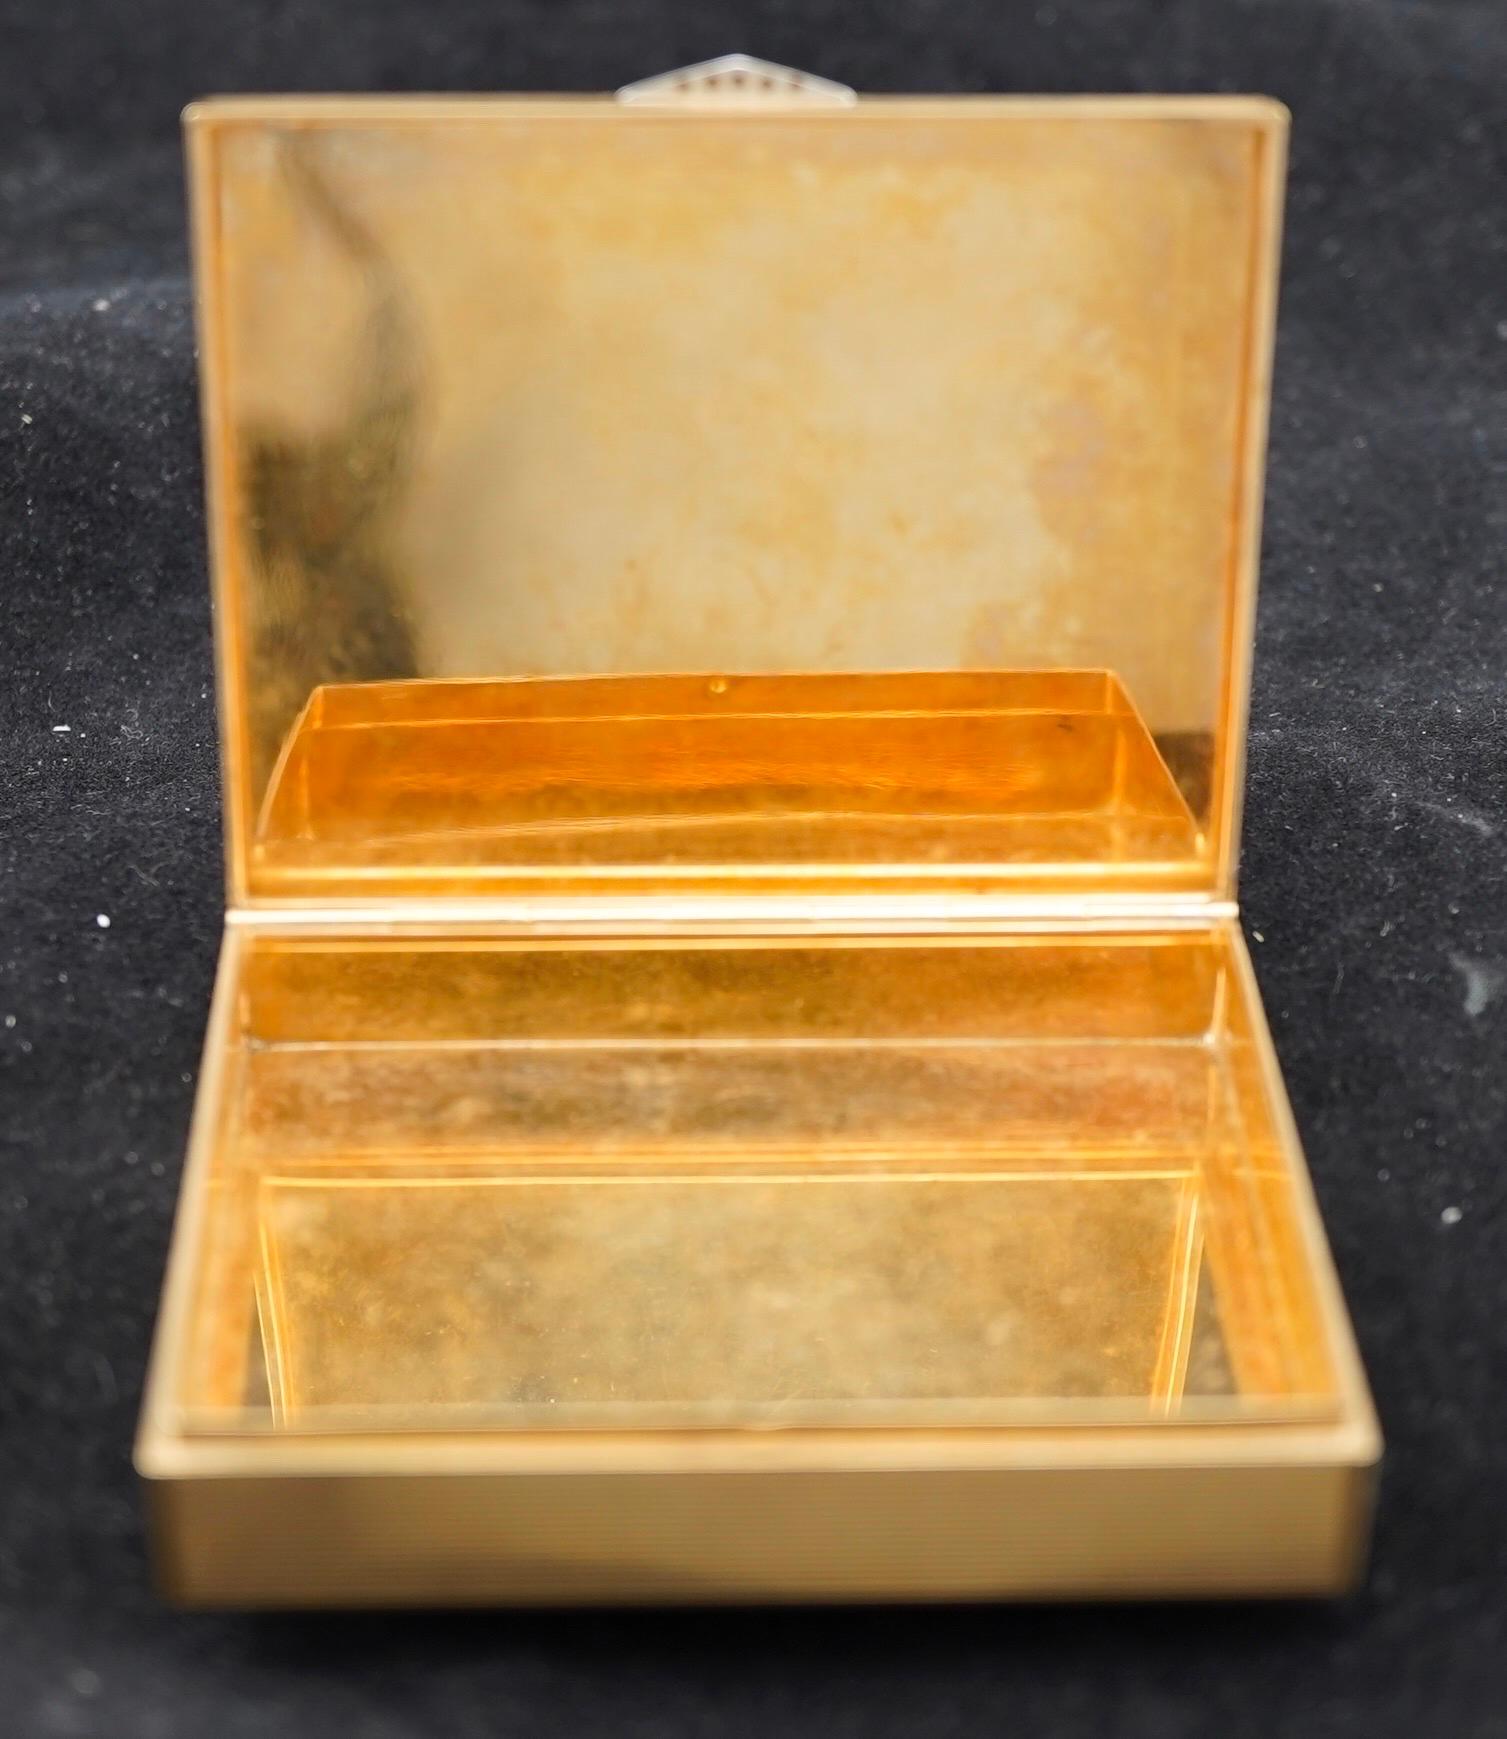 14K gold retro style box with diamond clasp. Weight 79.2 g.